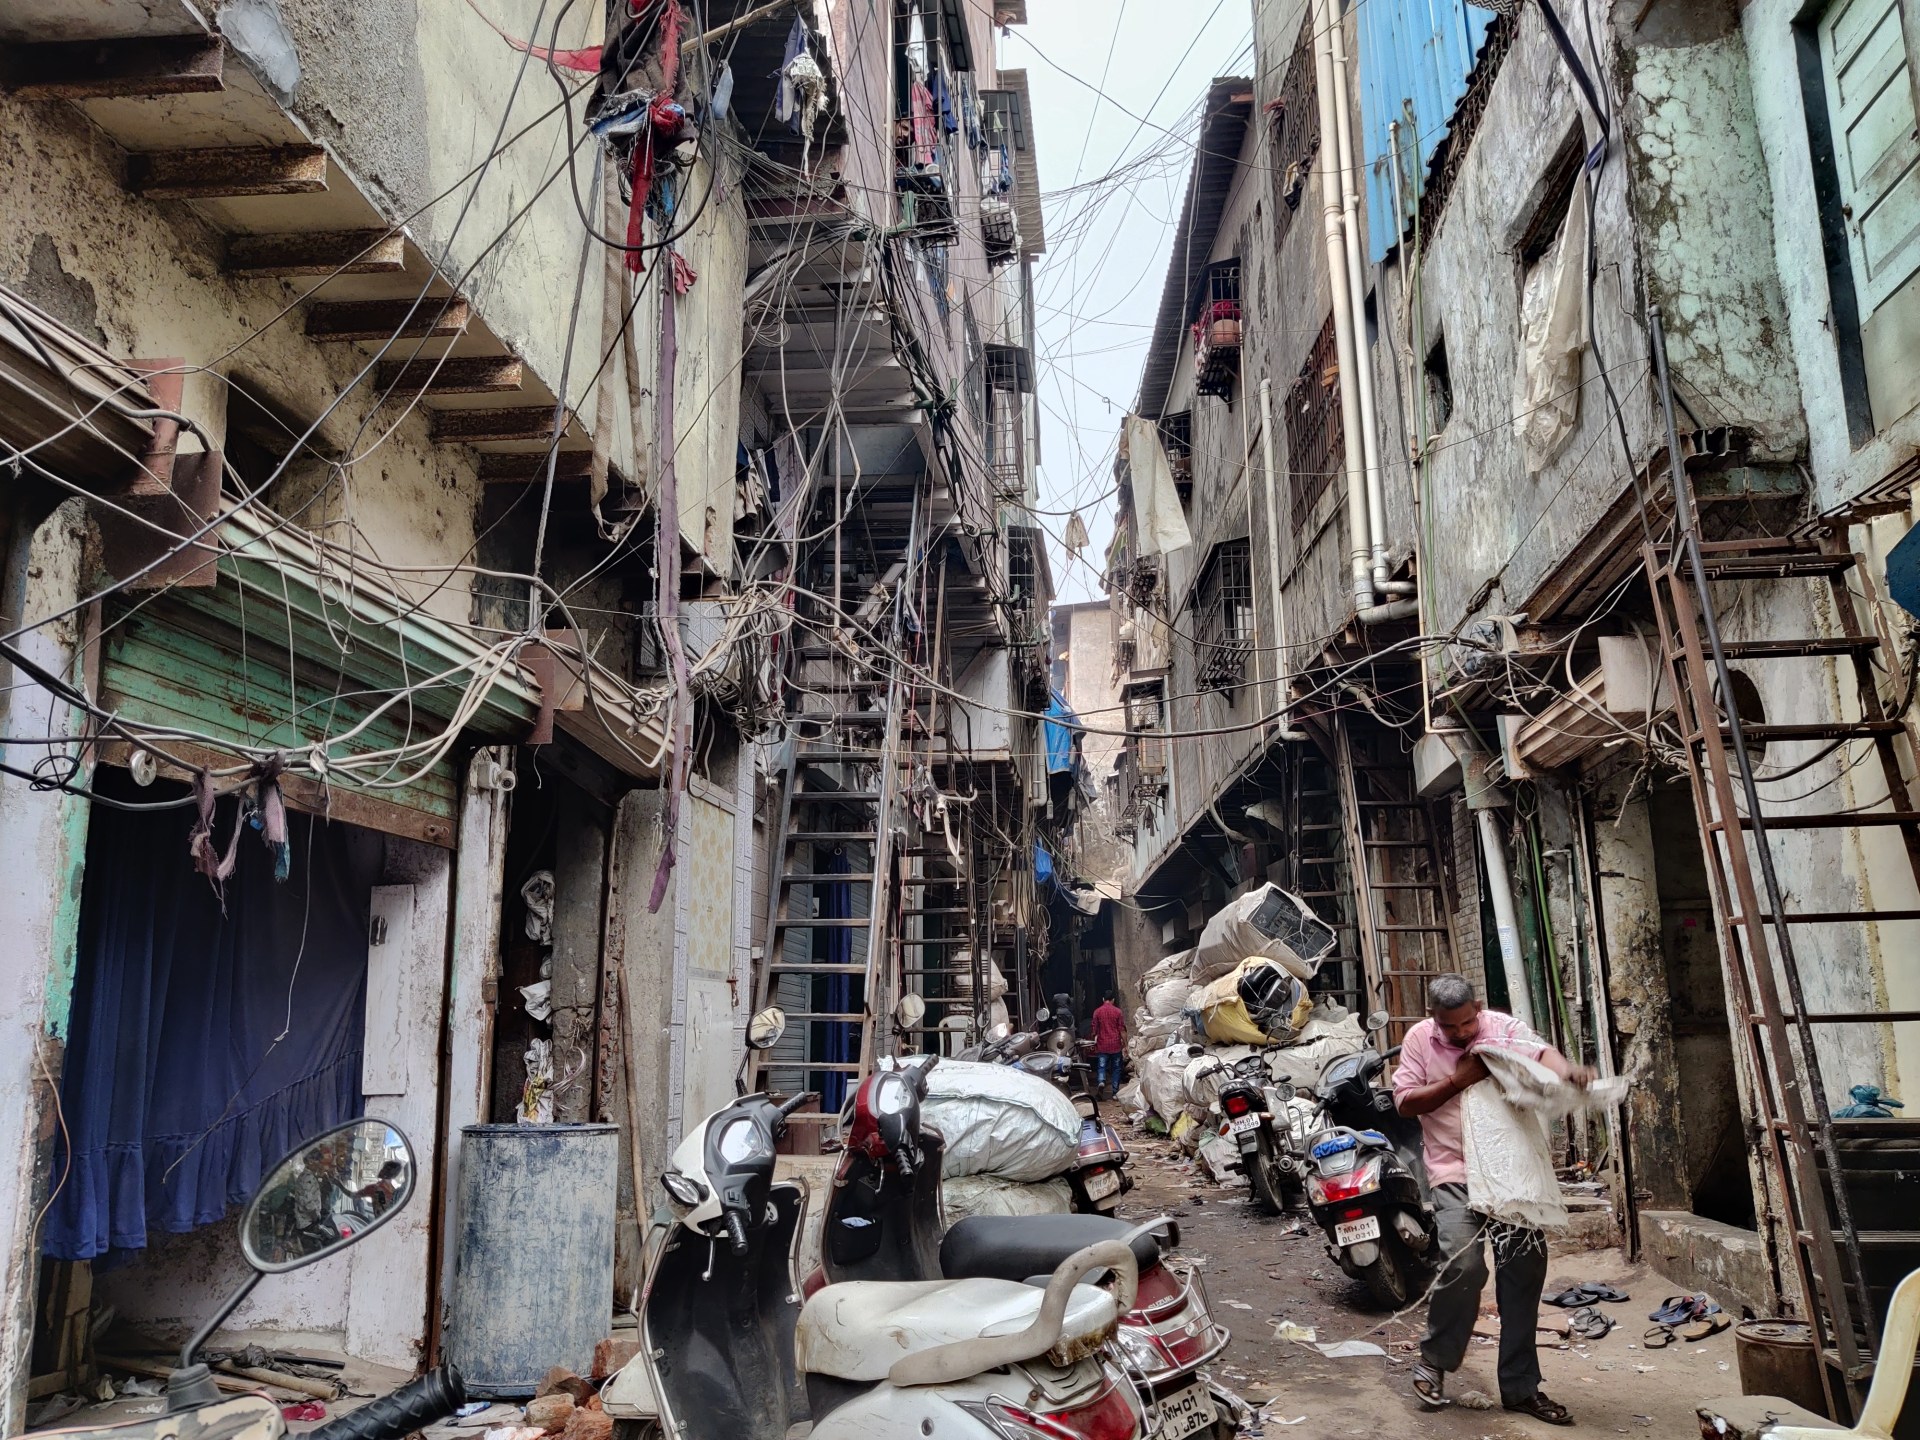 India's biggest slum faces wrecking ball as residents fear change